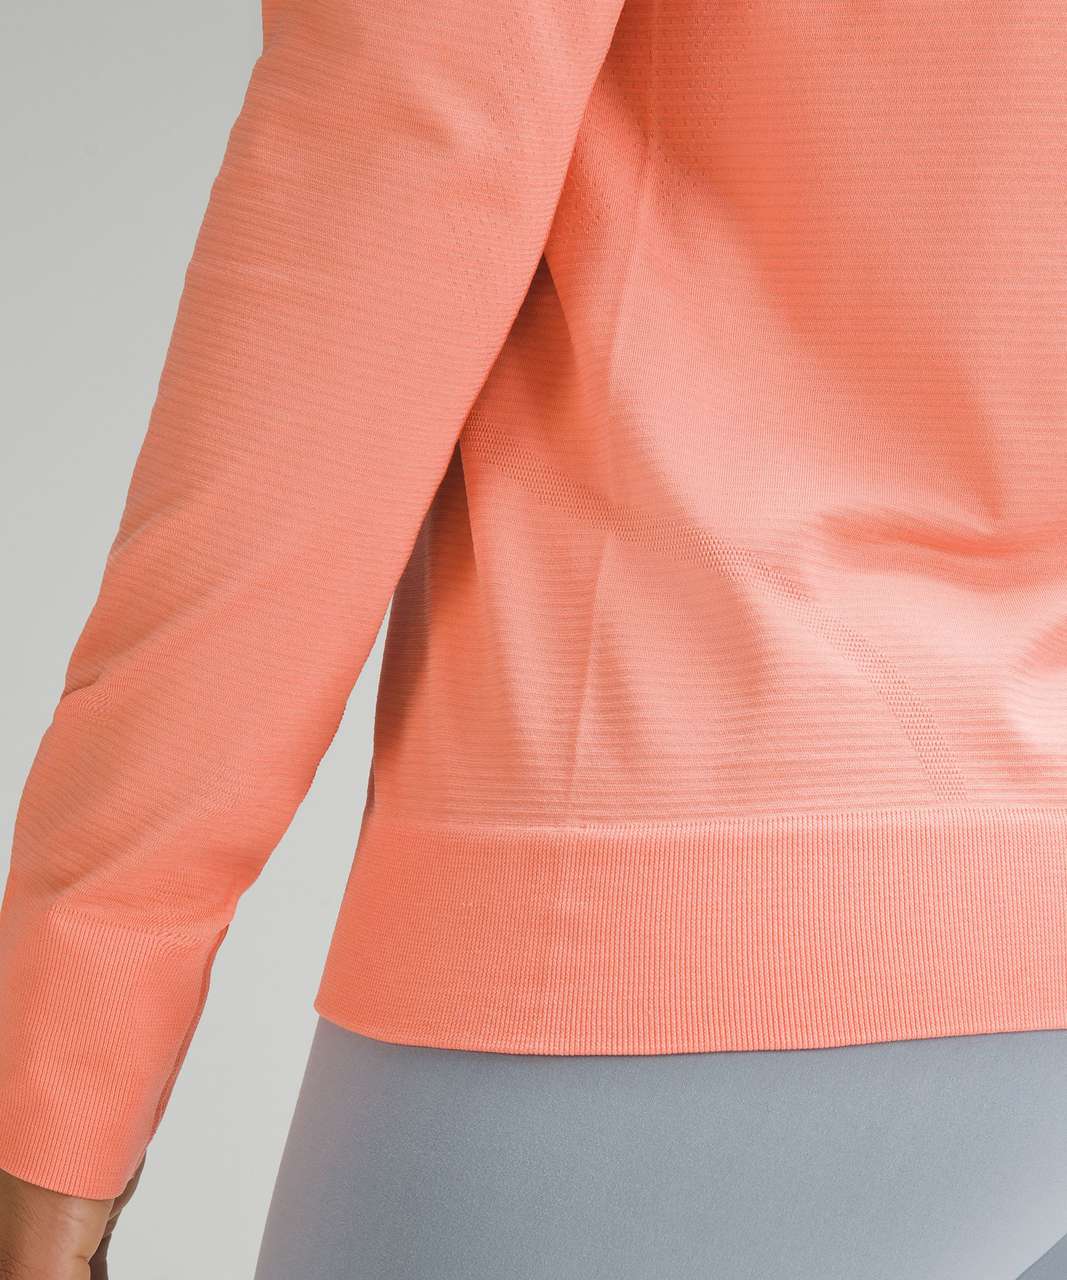 Lululemon Swiftly Relaxed Long-Sleeve Shirt - Sunny Coral / Sunny Coral